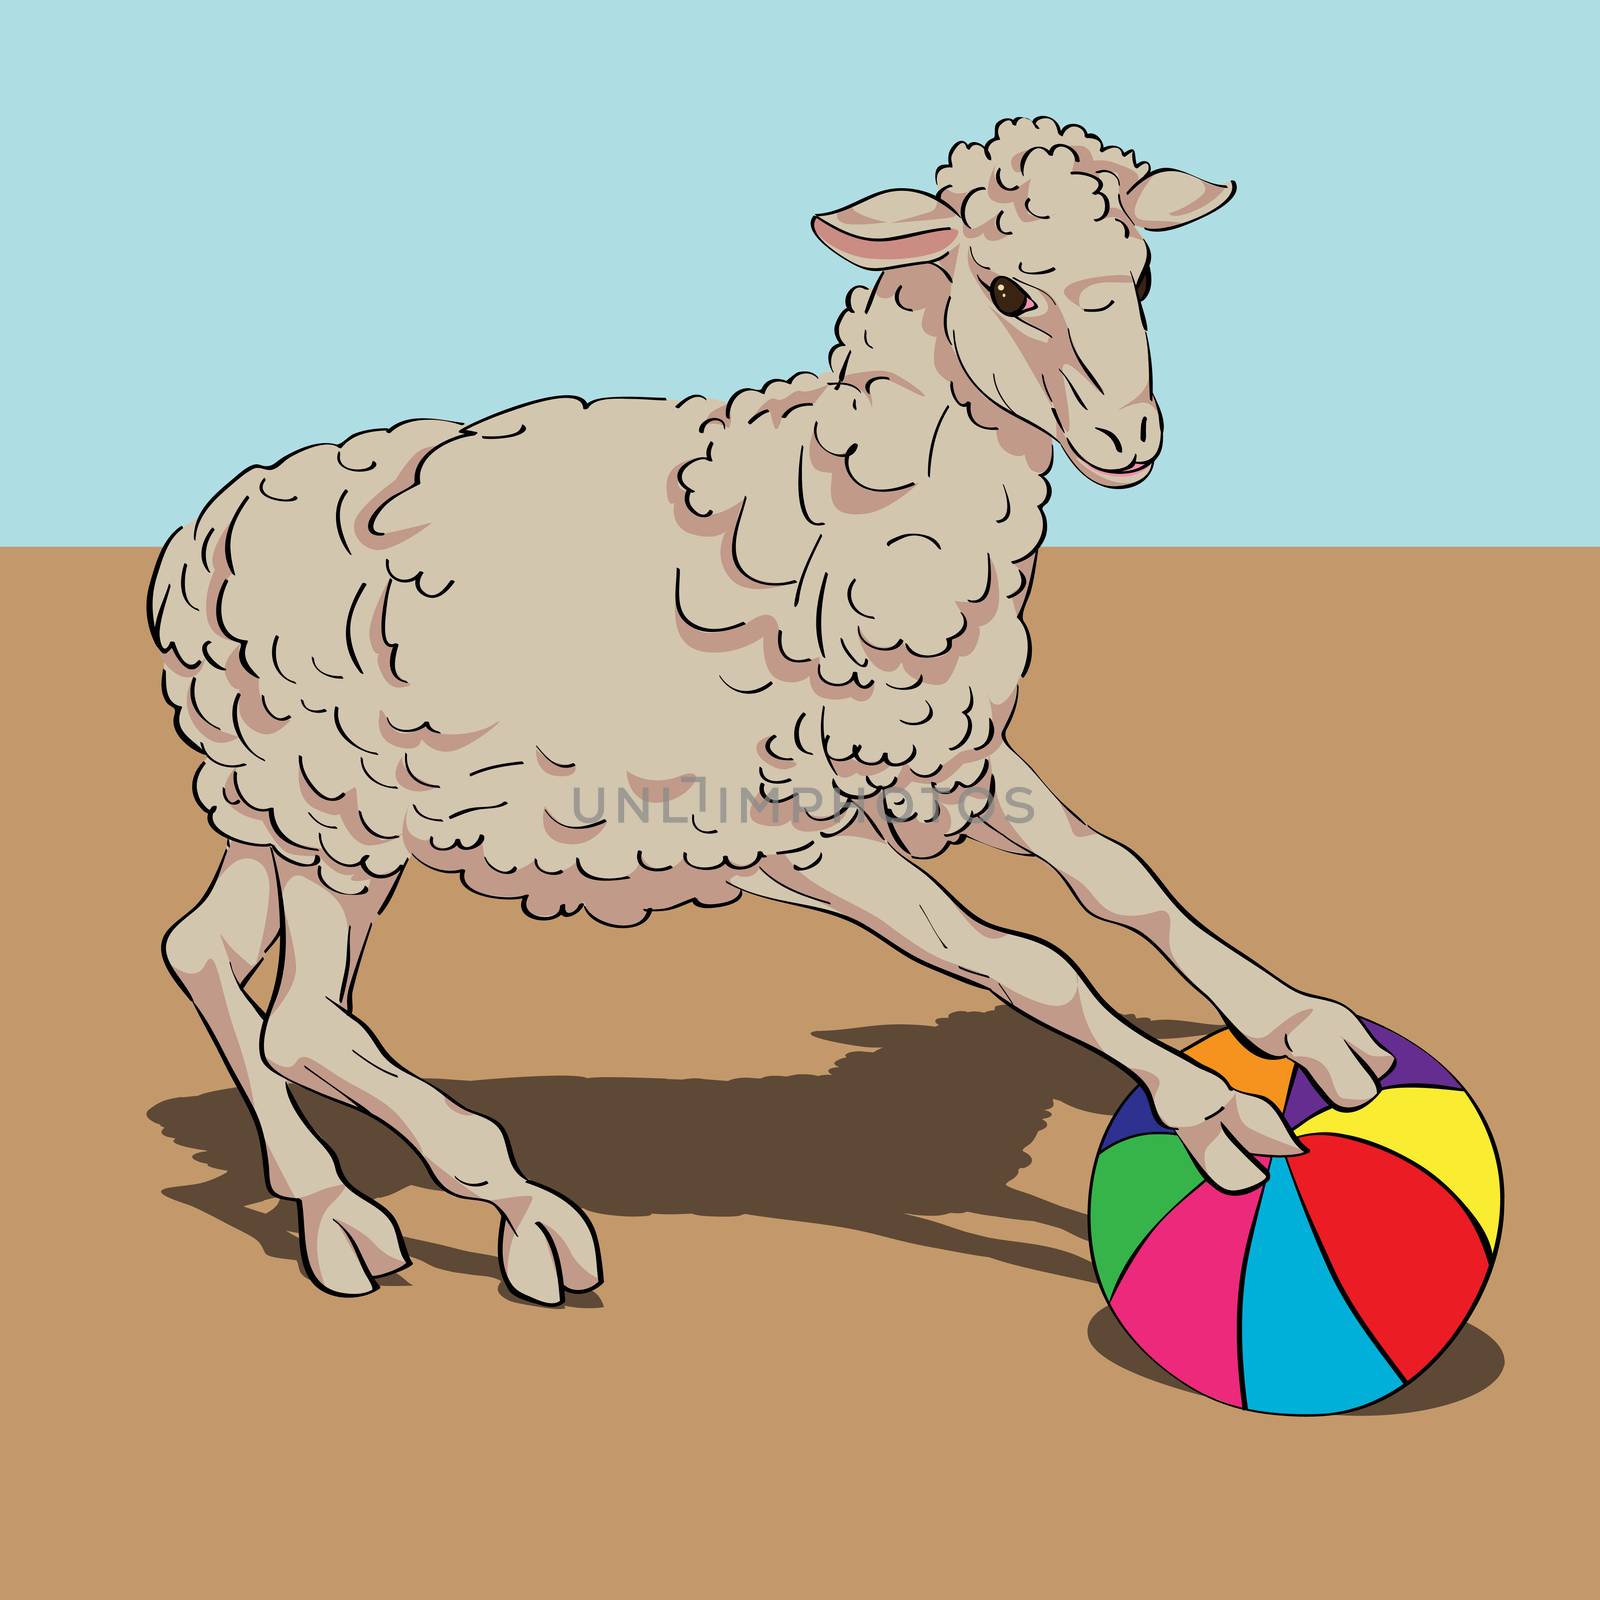 Sheep playing the ball card, hand drawn illustration over a vintage colored background 